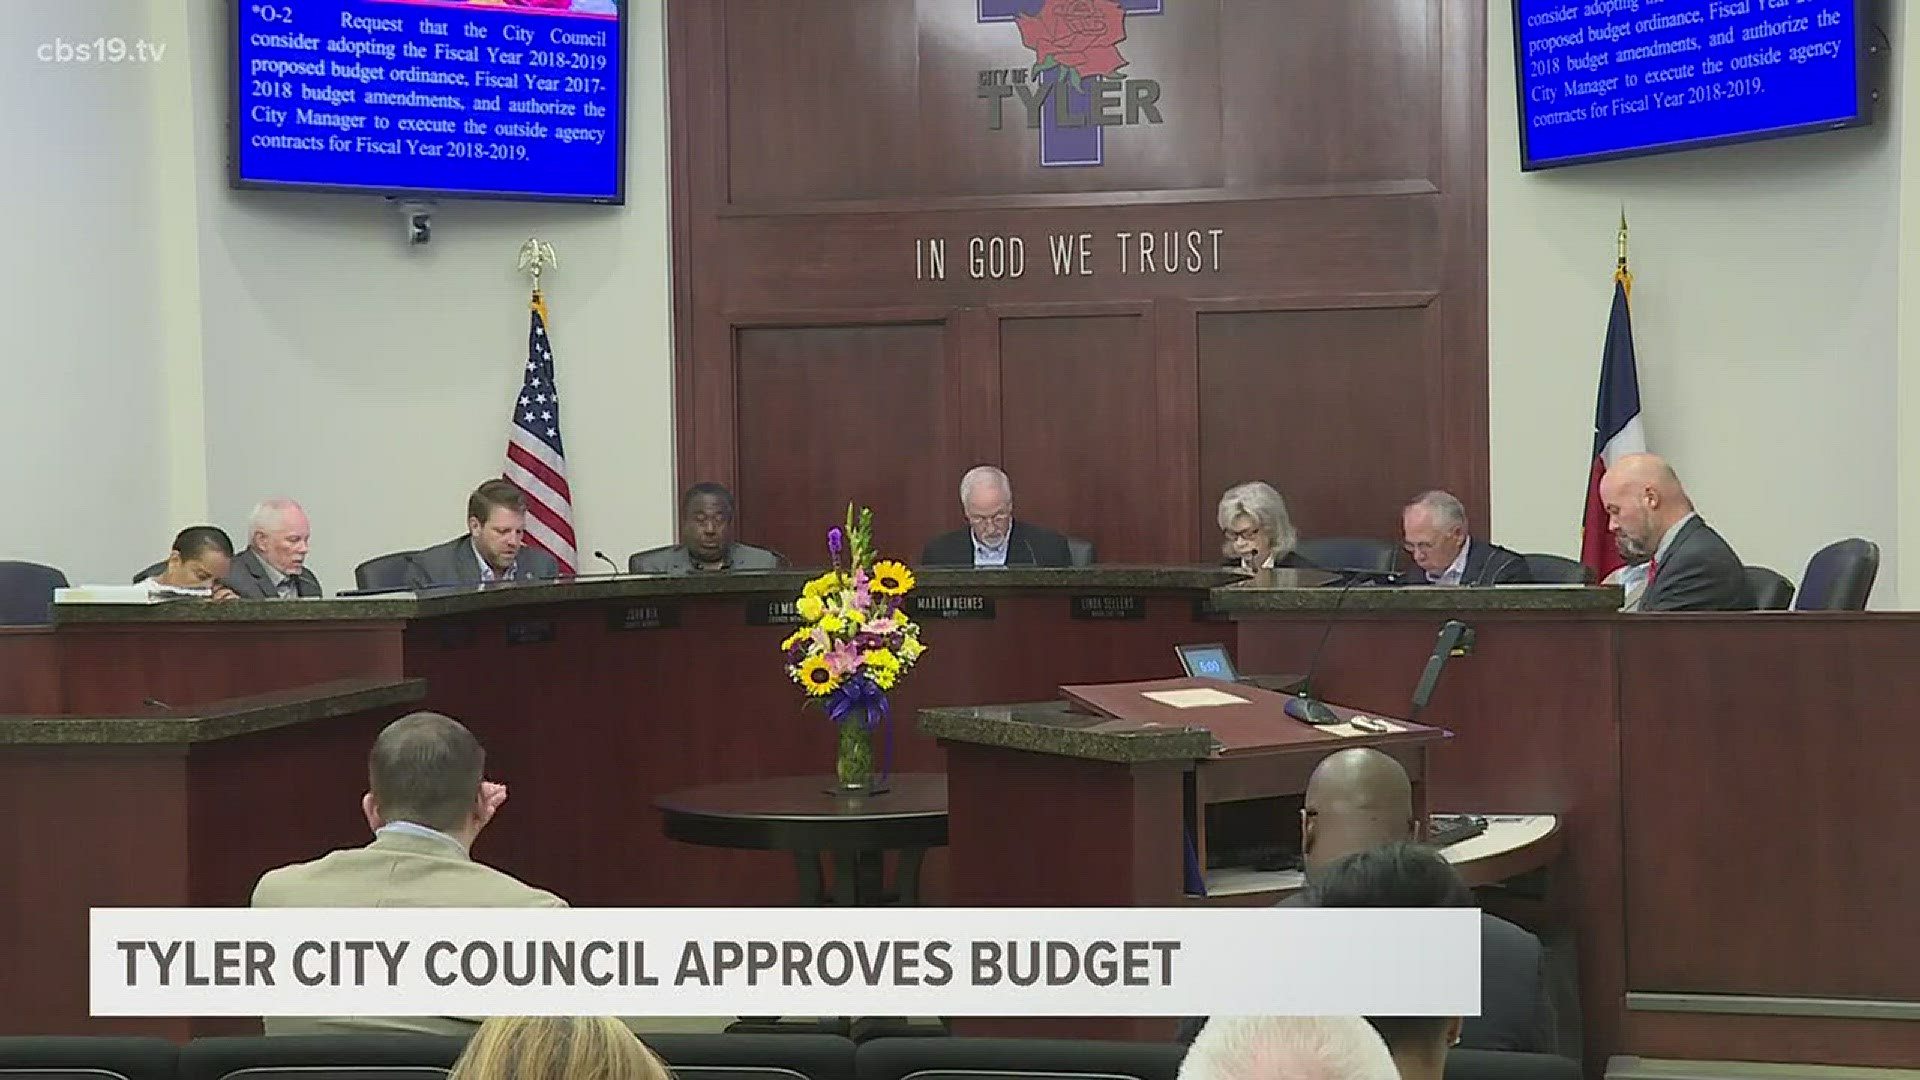 The Tyler City Council approved the fiscal year 2018-19 budget during today's meeting.